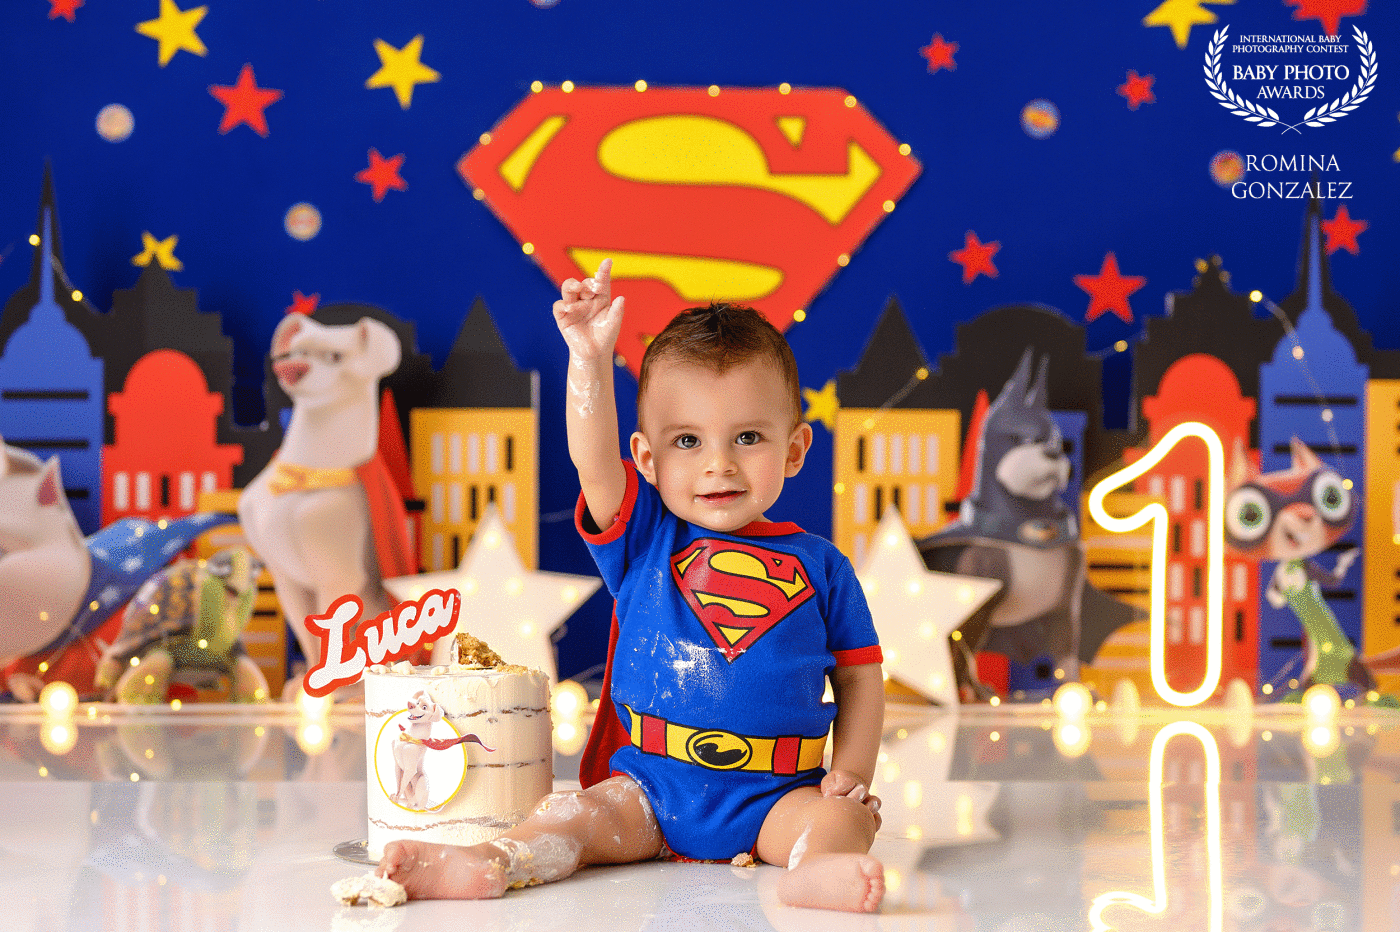 This little superman is ready to save the babies world. Luca is turning ONE and he had a great moment during his birthday cake session.